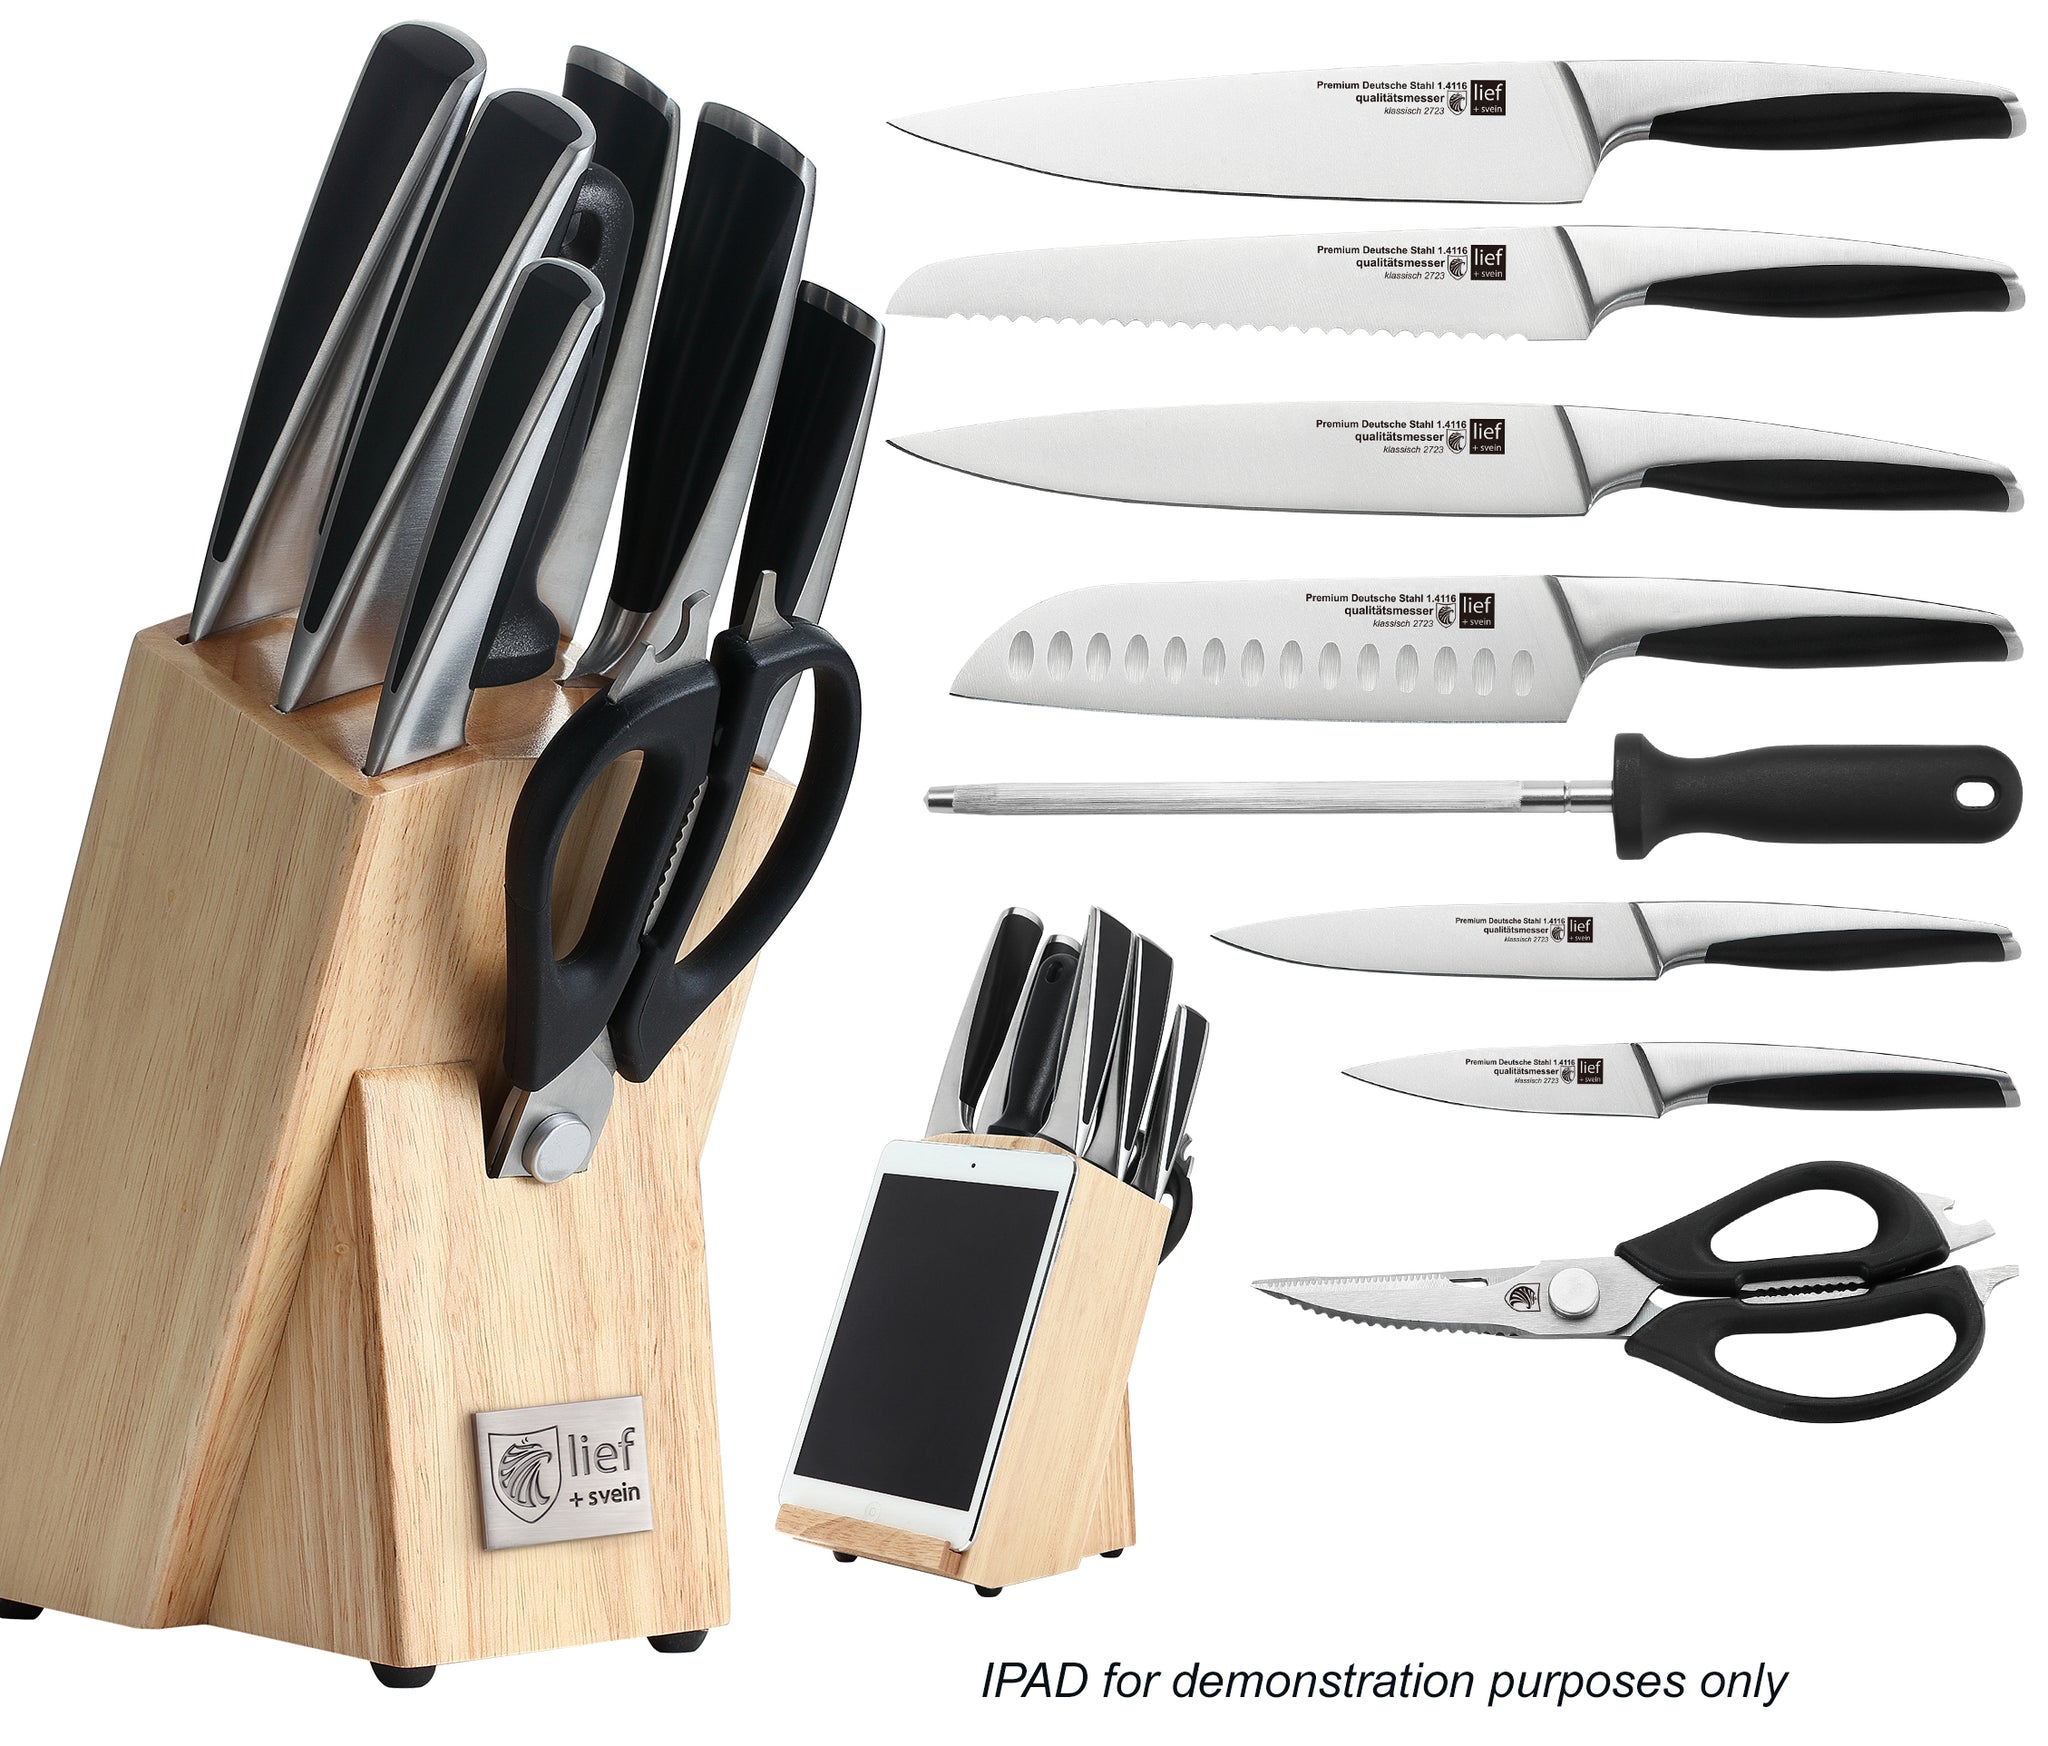 Anvil 18 mm and 9 mm Snap-Off Knife Set (2-Piece) 86-212-0111